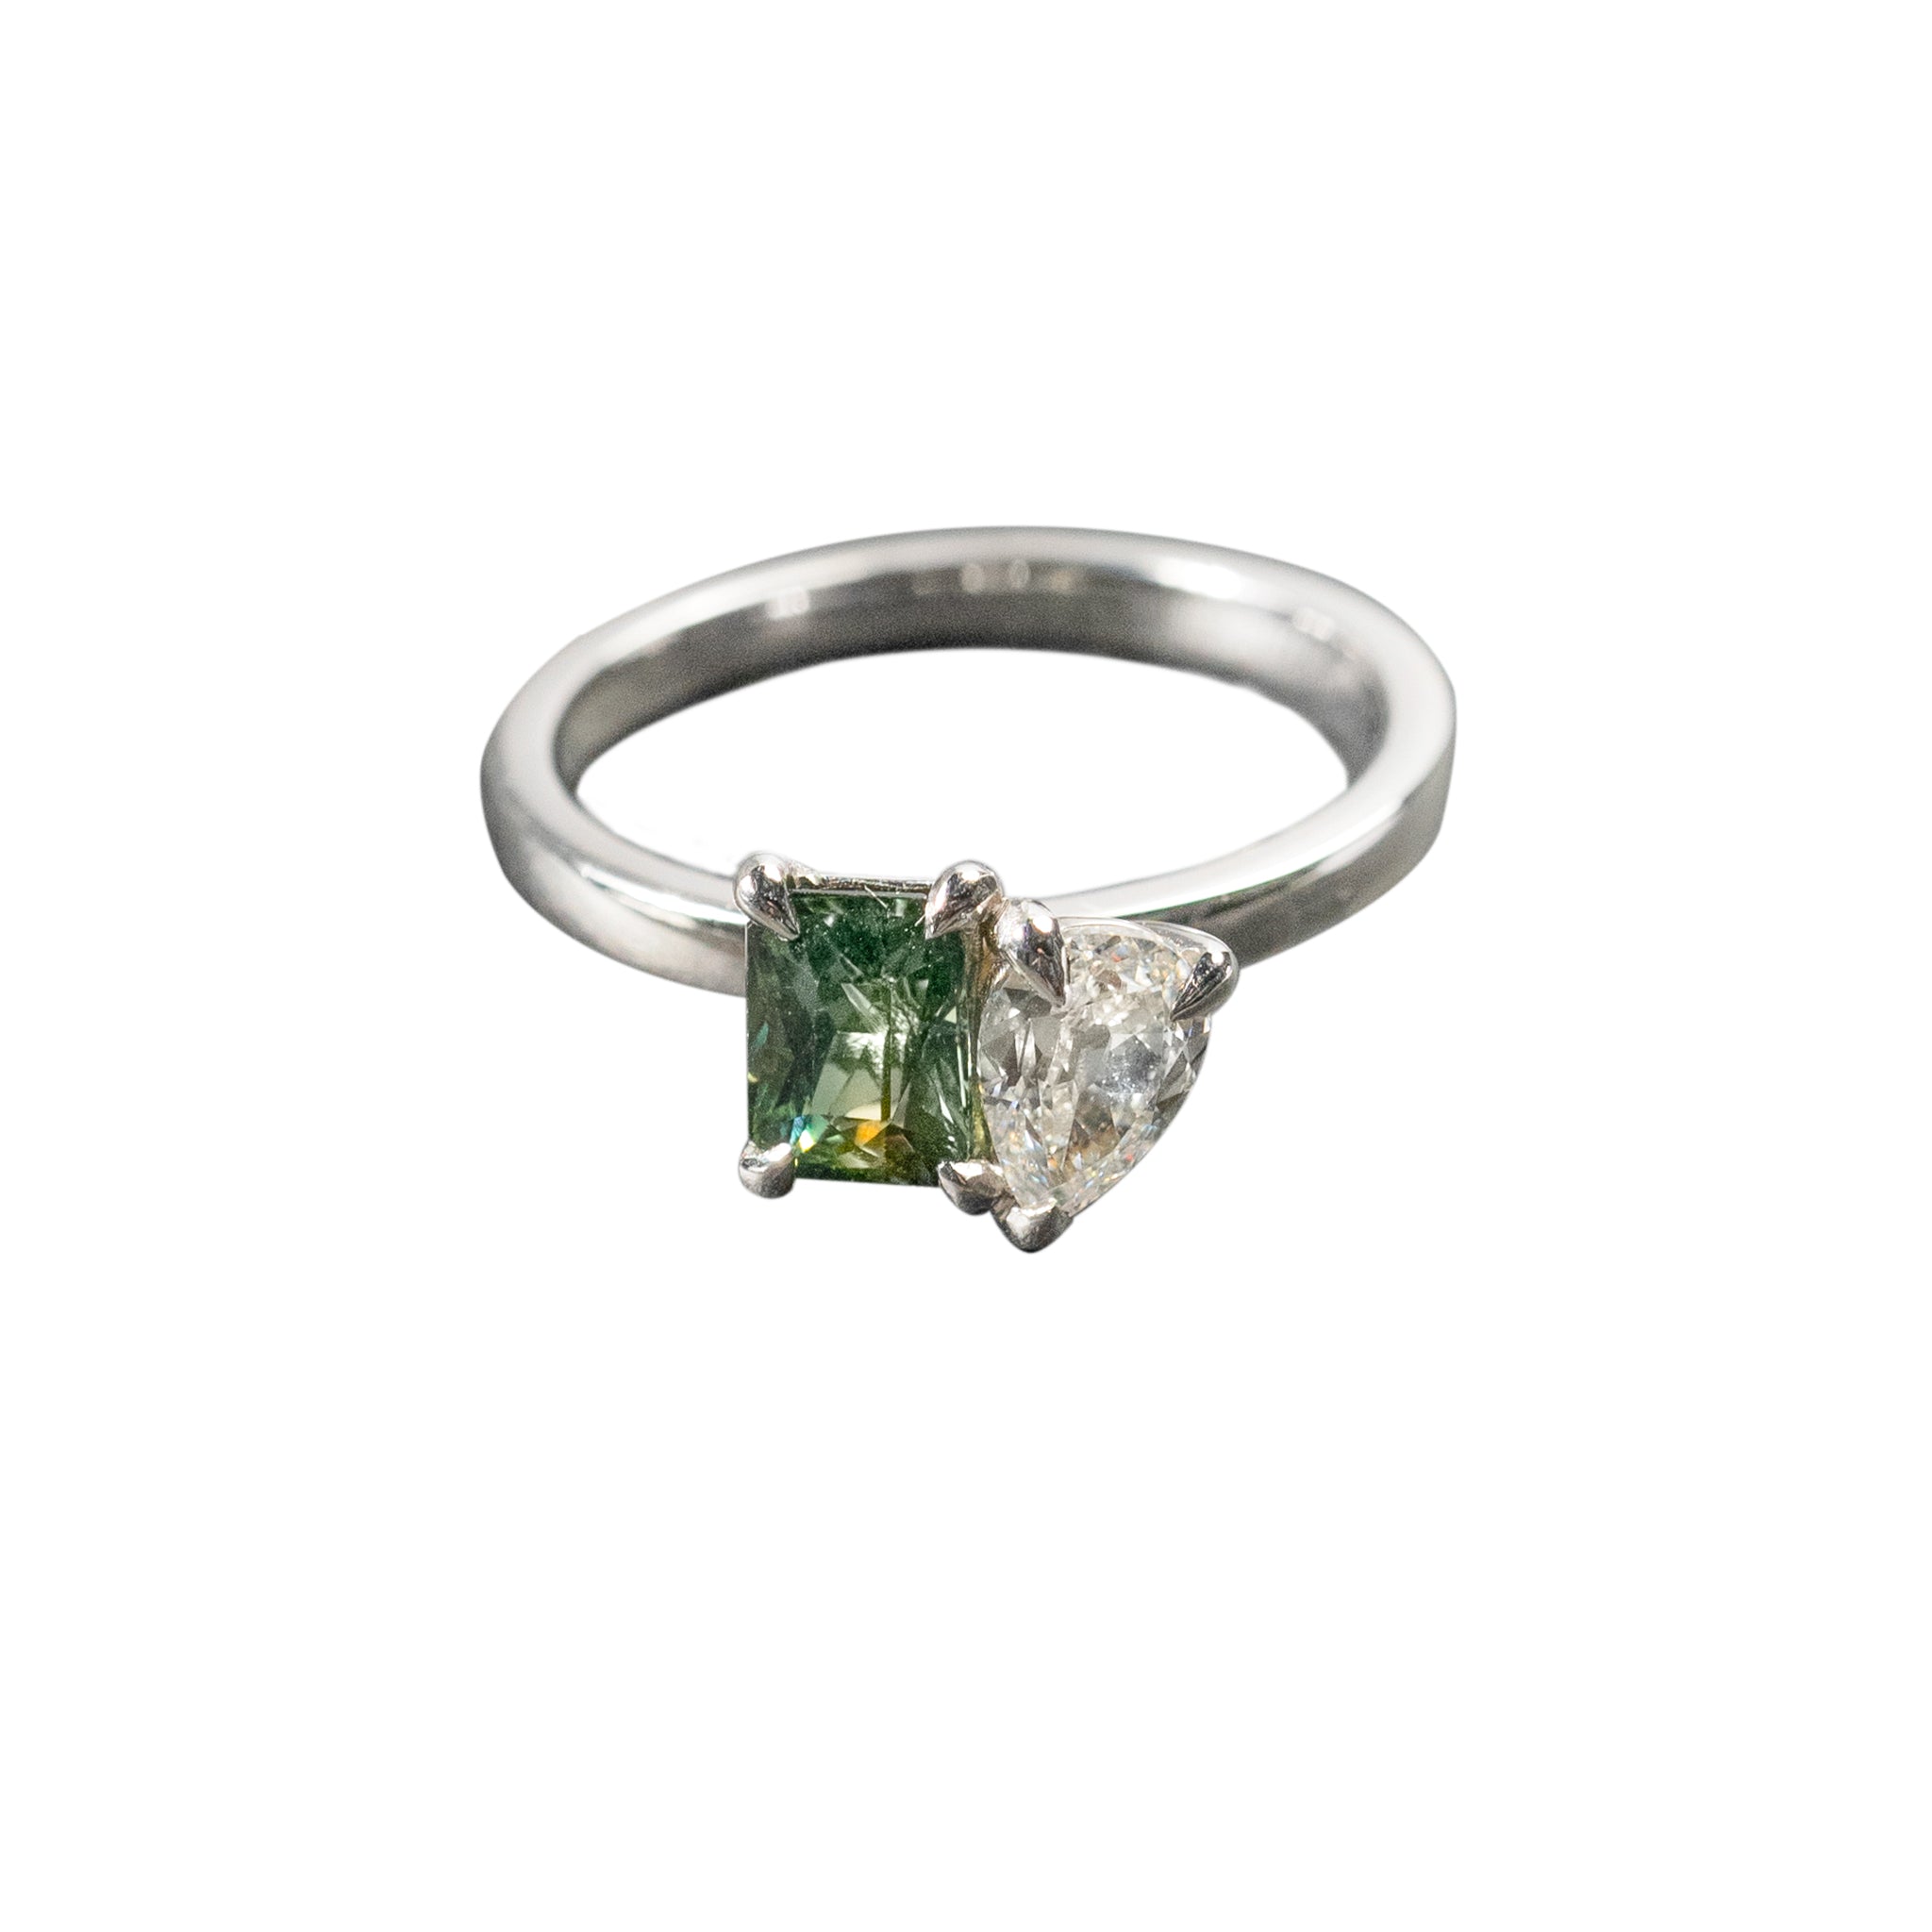 18K White Gold Pear Shape Diamond with Unheated Madagascar Green Sapphire Ring